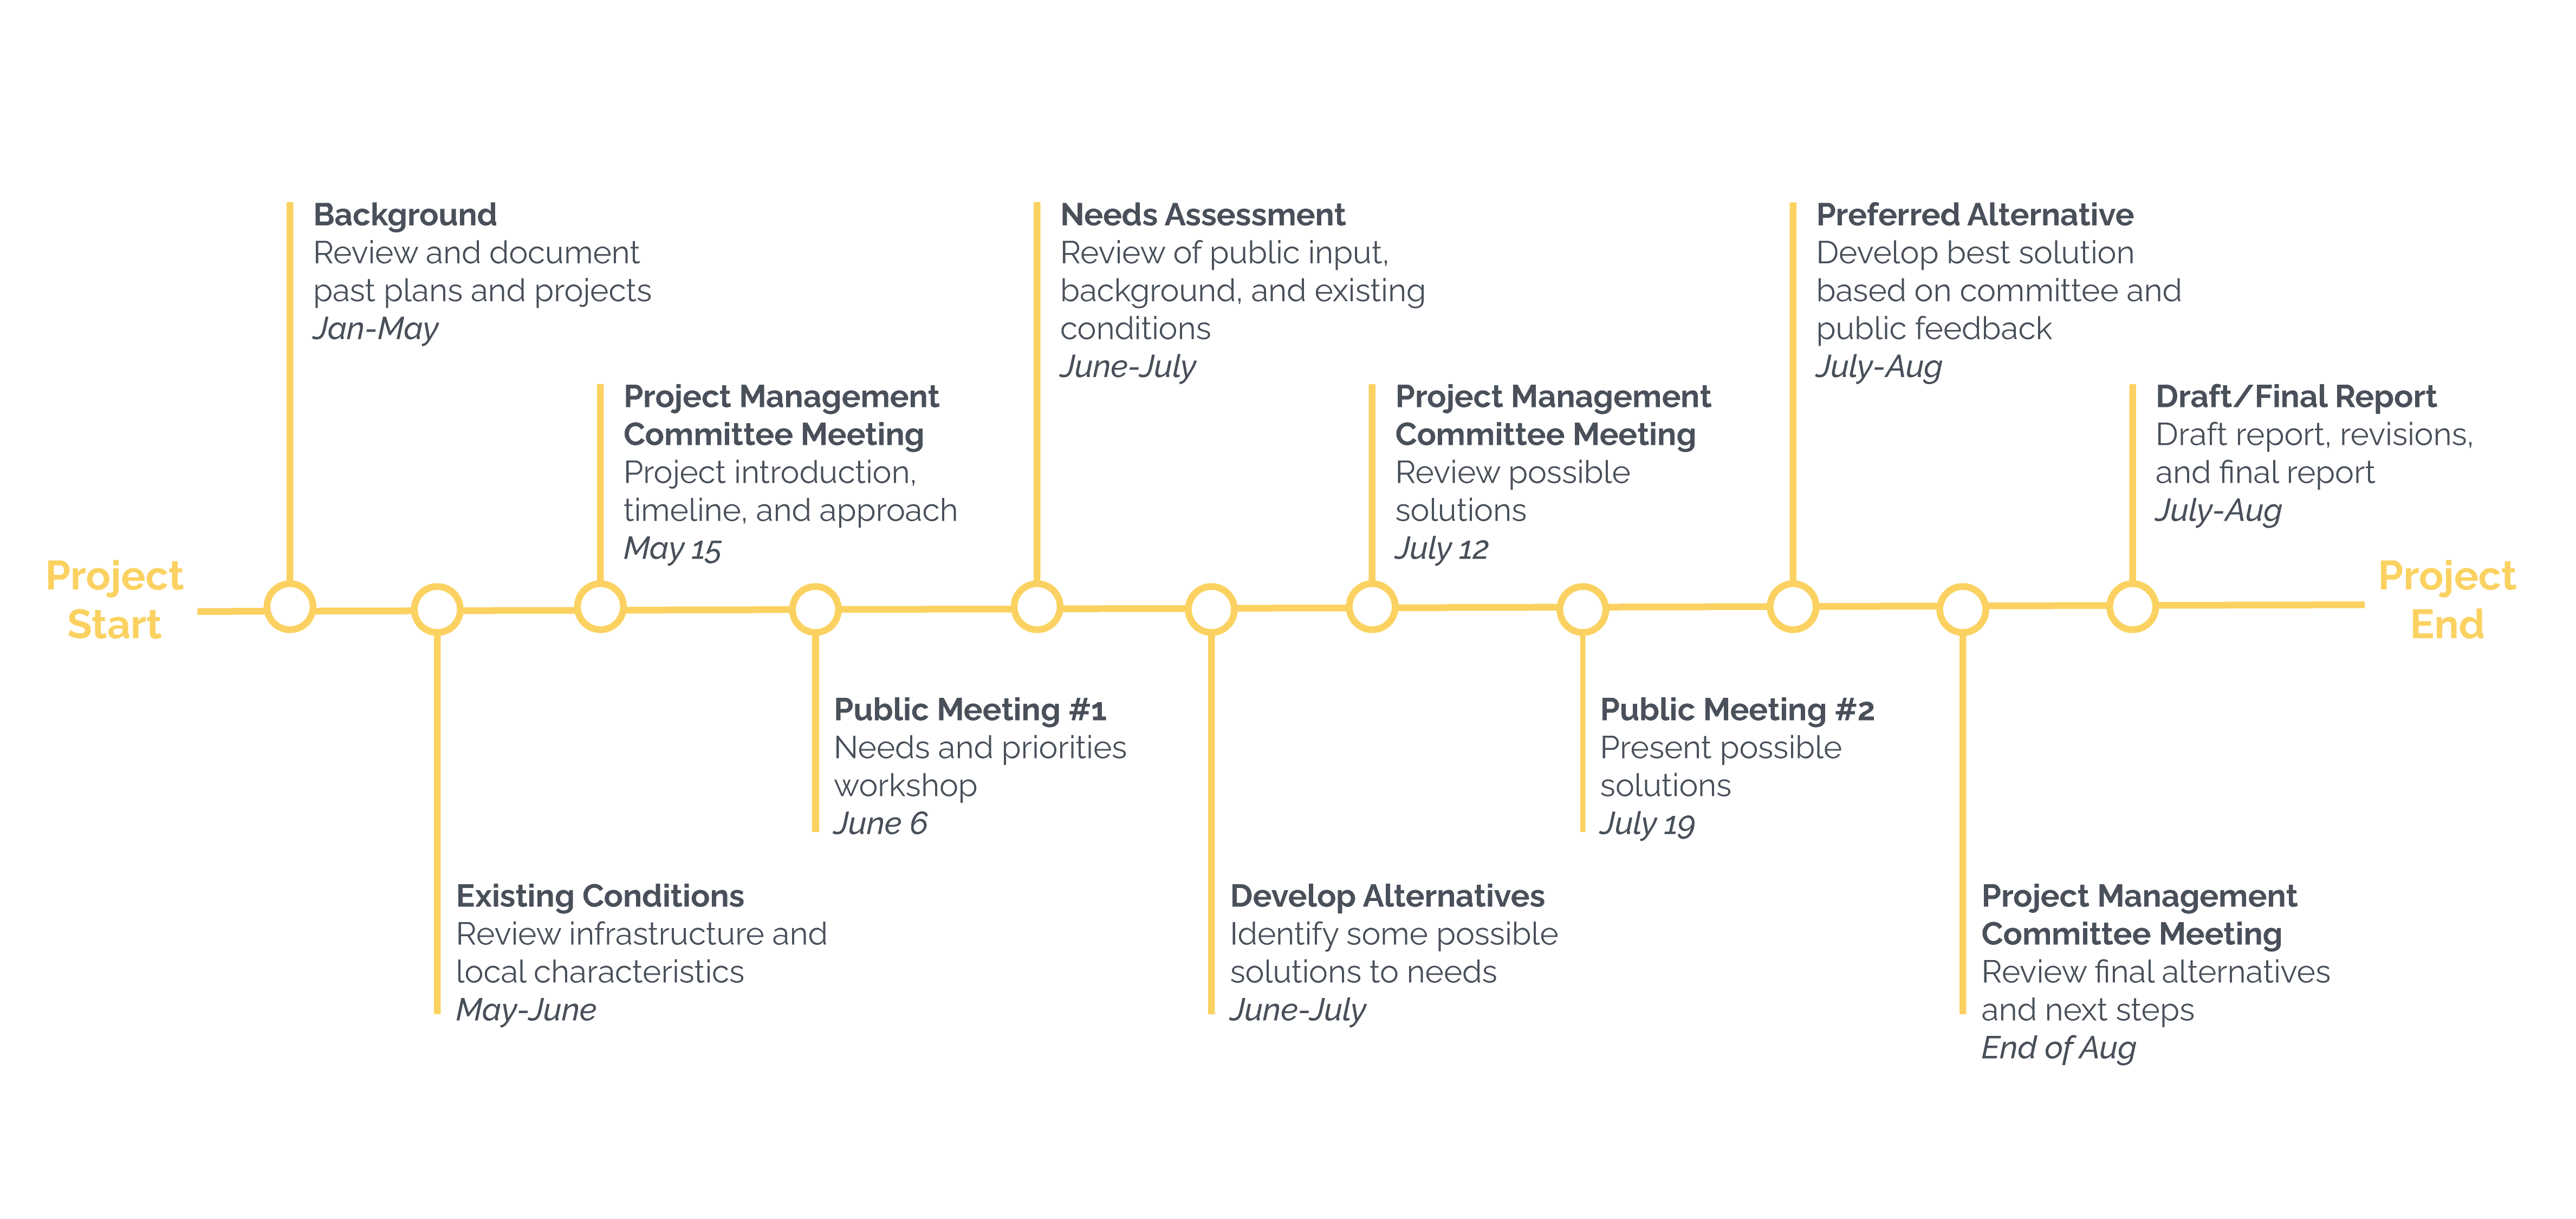 Project Timeline starting in January and ending in July-August